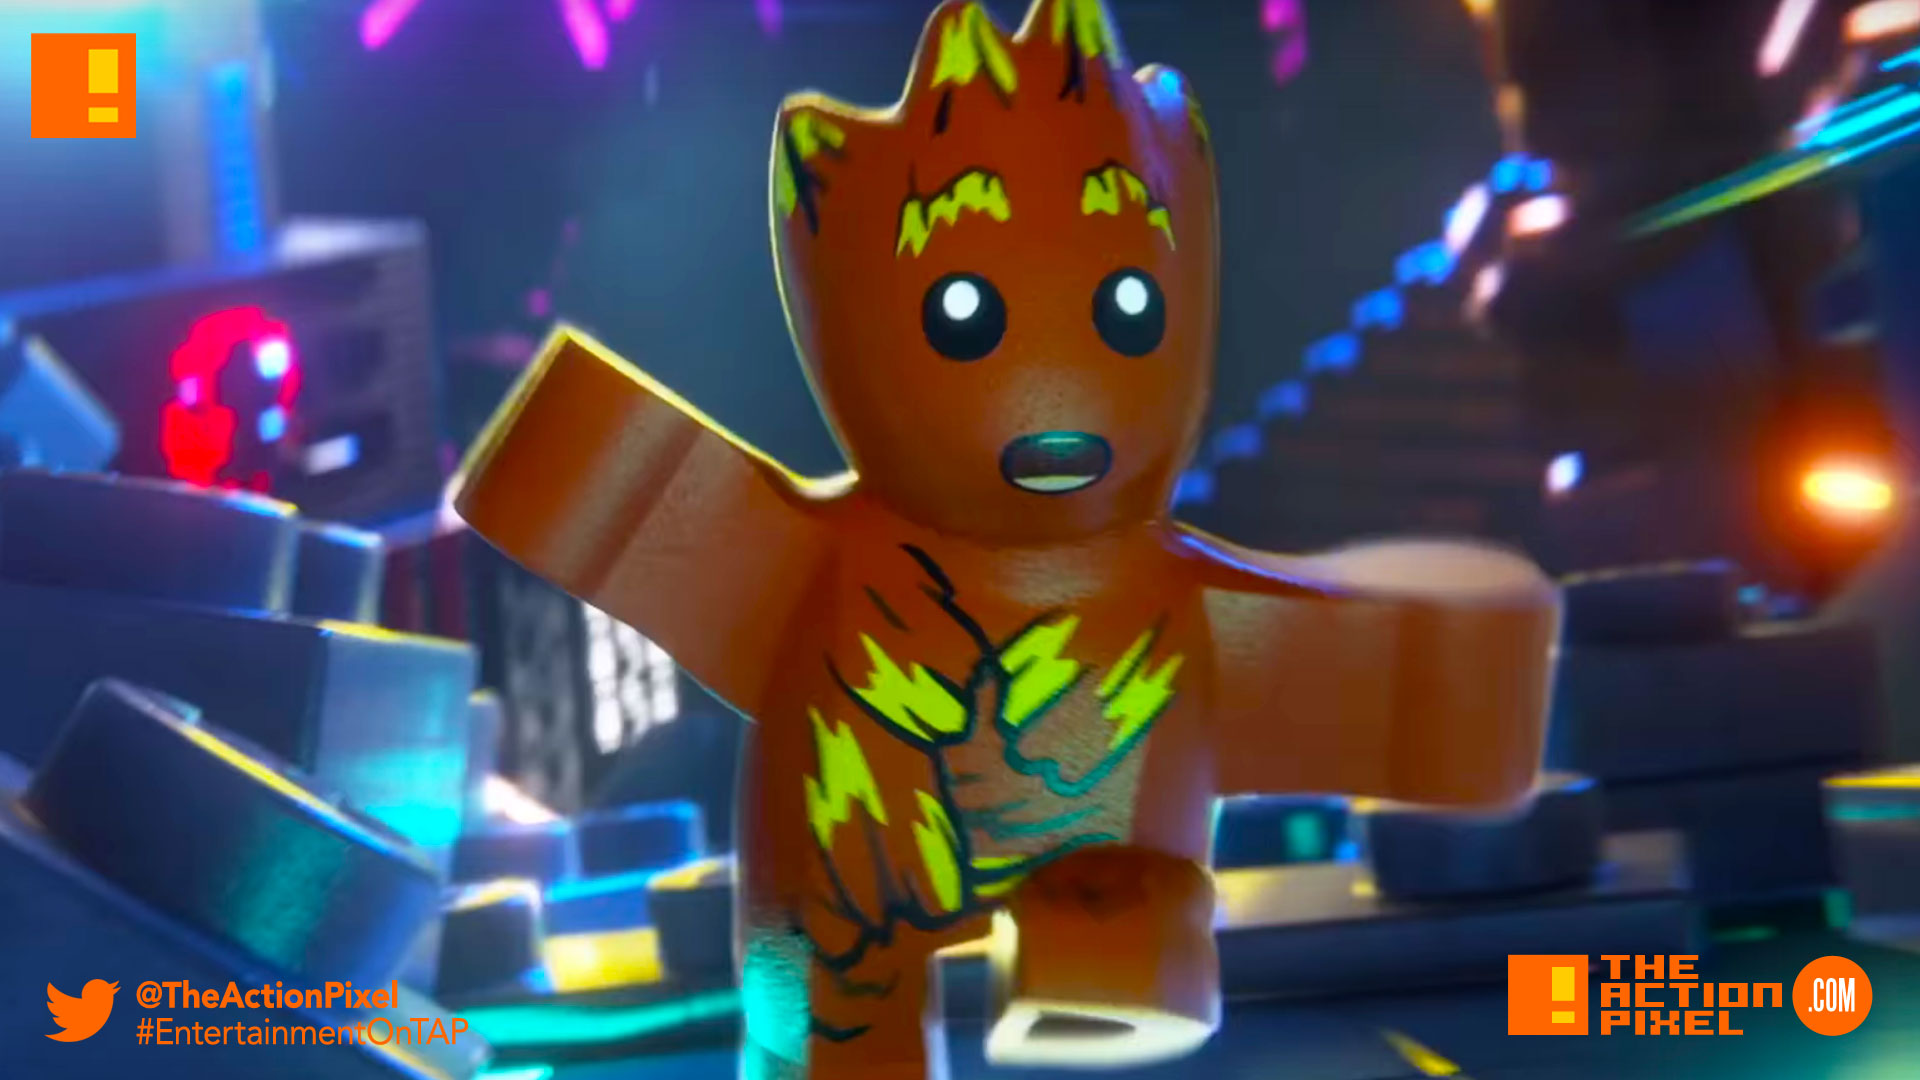 groot, lego marvel super heroes 2, teaser, trailer, marvel, lego, groot,gotg, guardians of the galaxy, doctor strange, entertainment on tap, the action pixel,